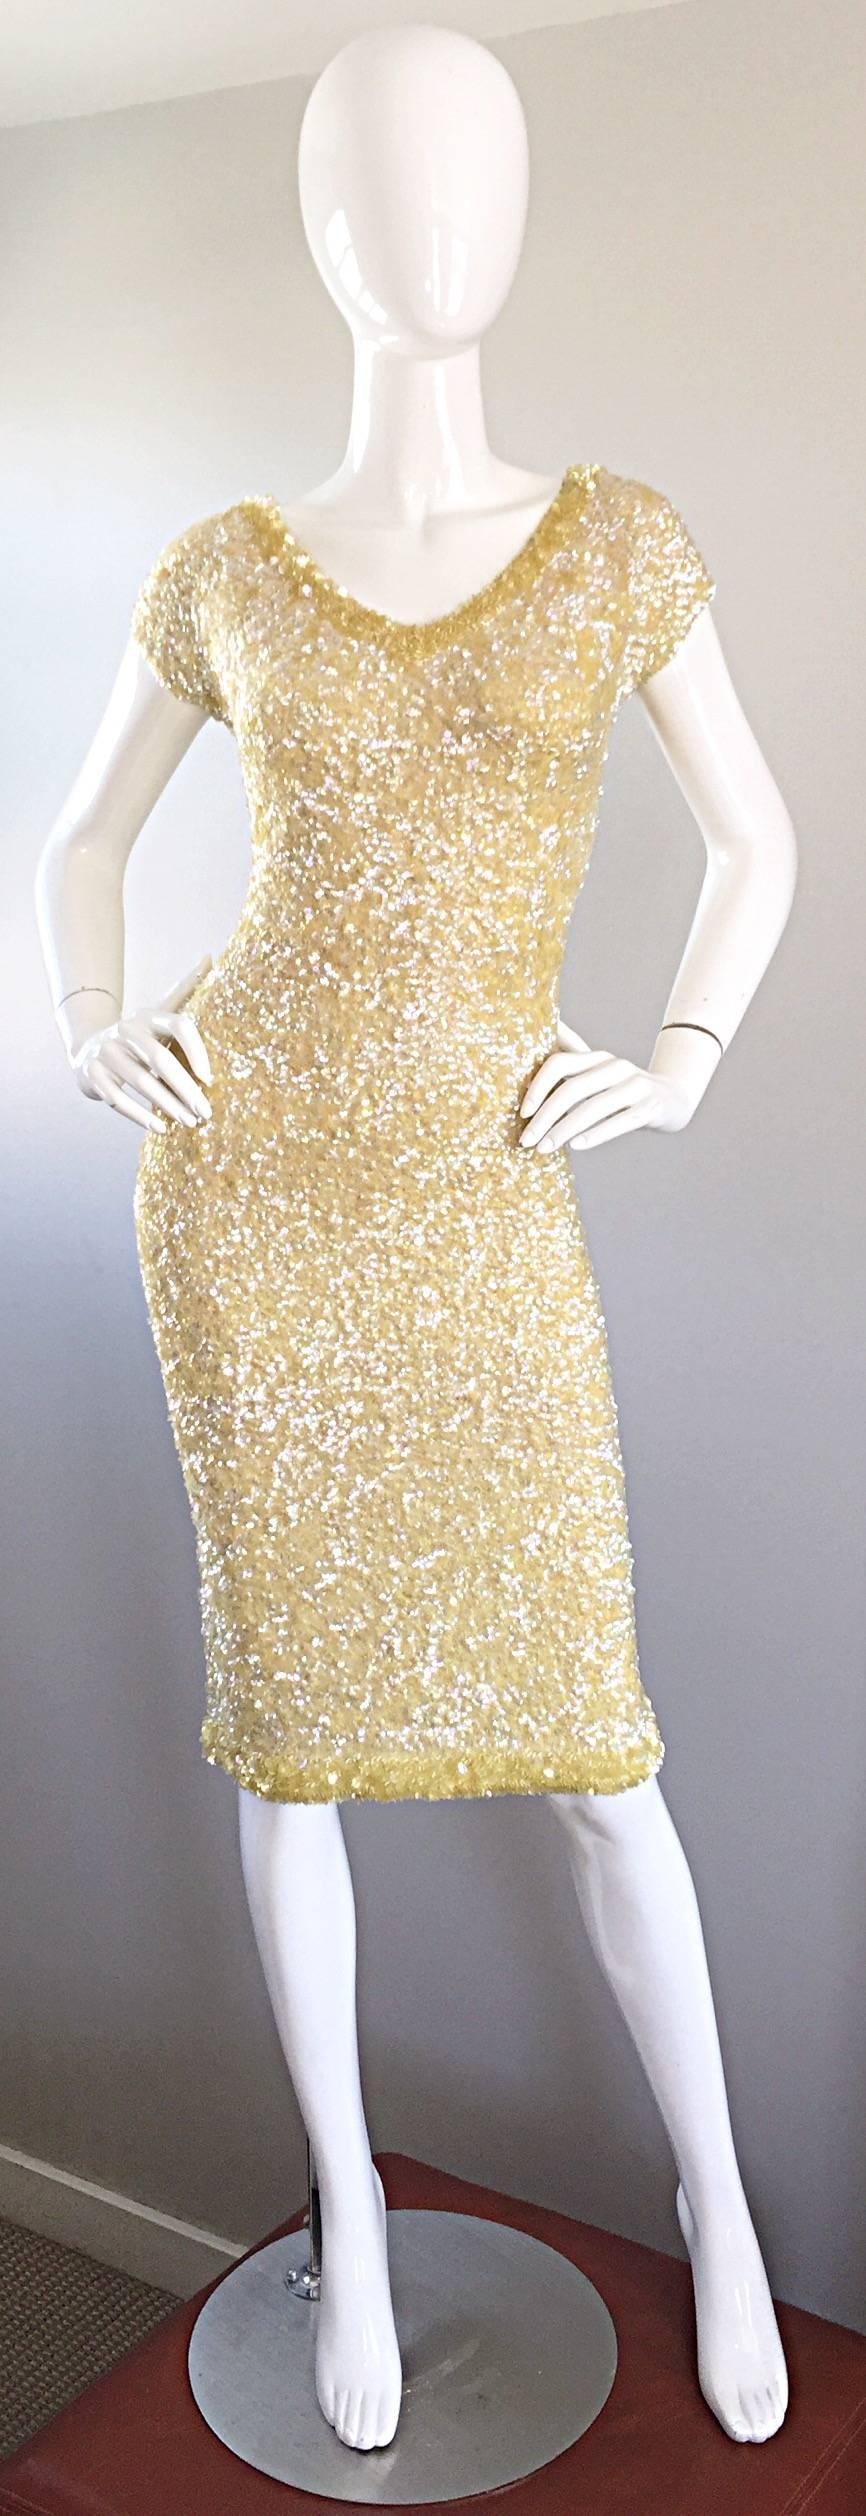 Extraordinary 1950s GENE SHELLY'S light yellow sequined wiggle wool dress! Bombshell fit that hugs the body in all the right places. Thousands and thousands of hand sewn iridescent sequins and paillettes throughout the entire dress! Plunging back